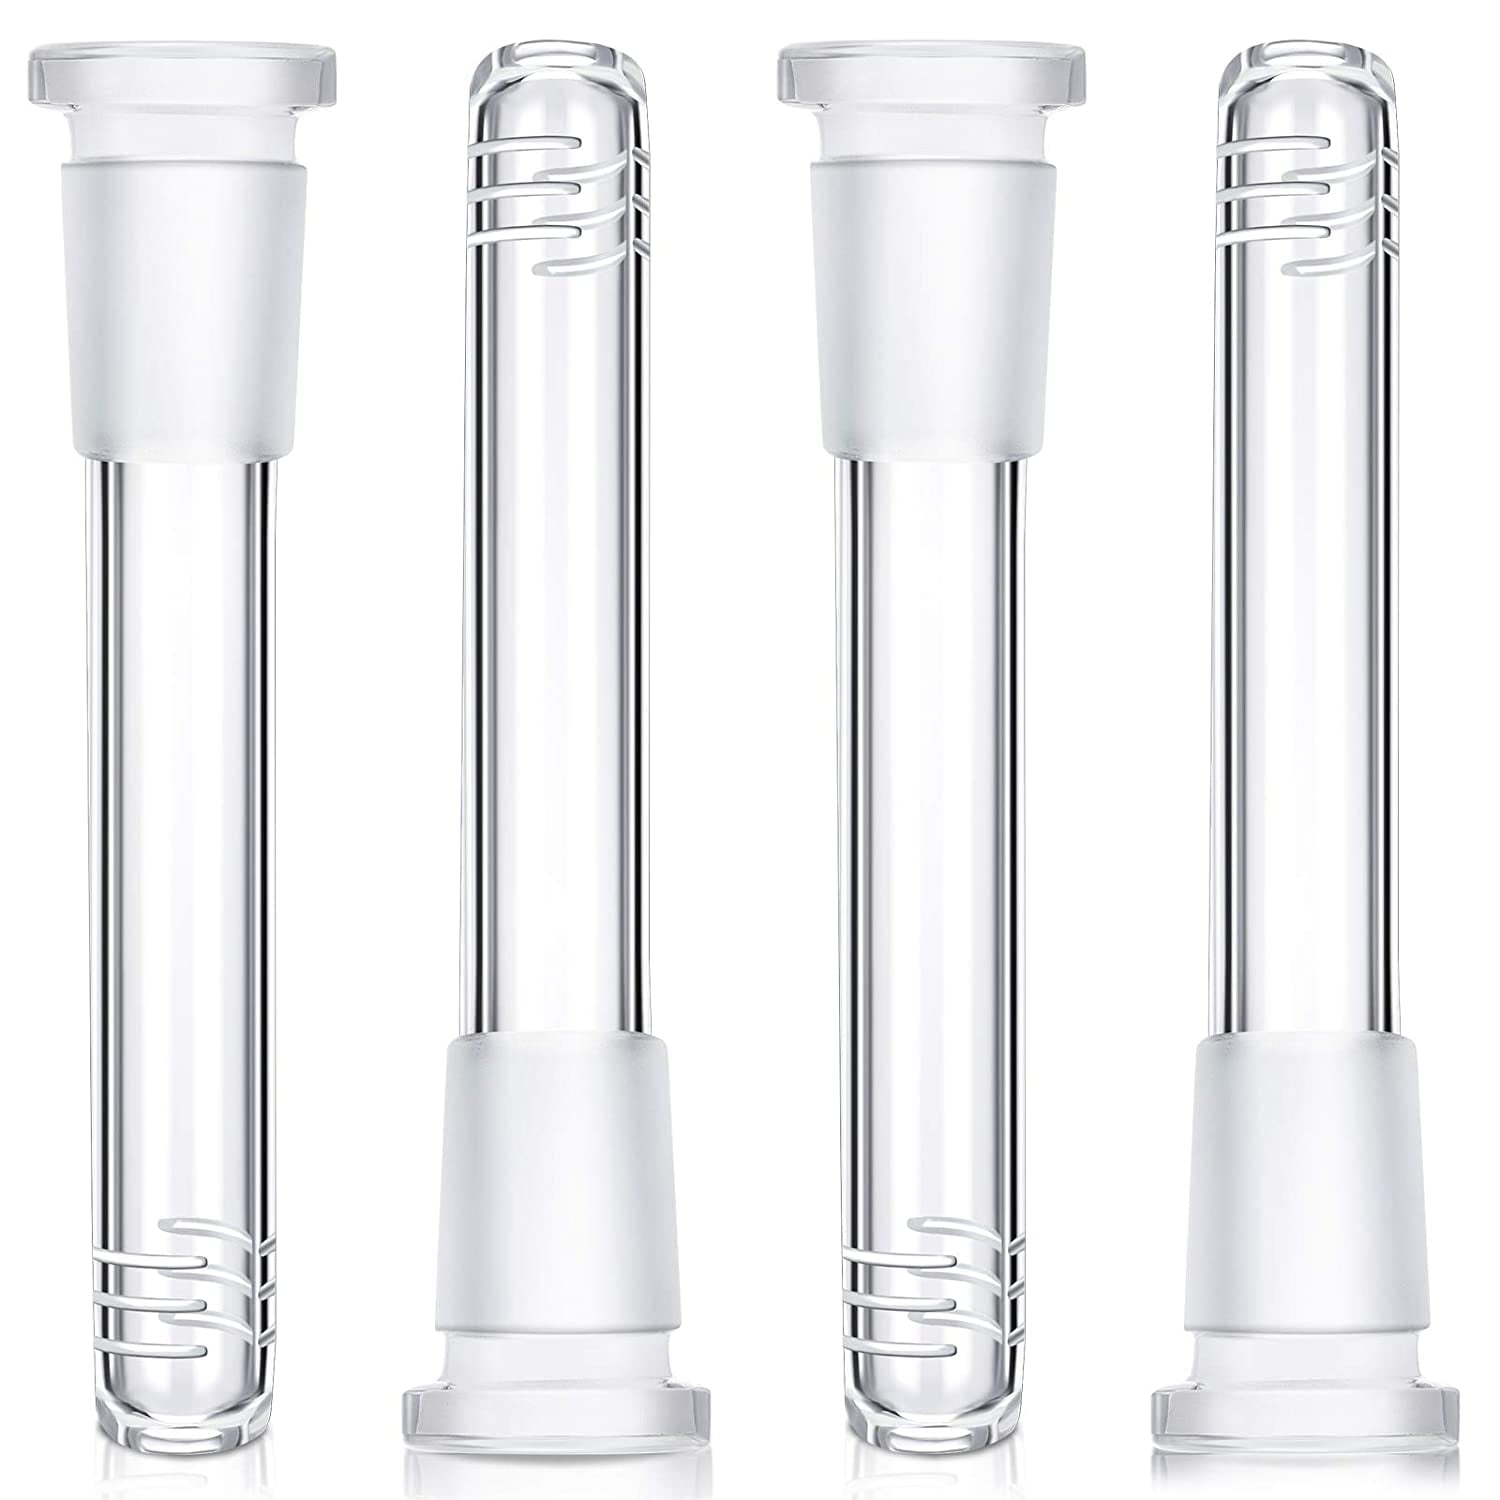 5 inch 2 Pack 18mm by 14mm Down Tube Stem Clear Scientic Glass Tube Adapter 